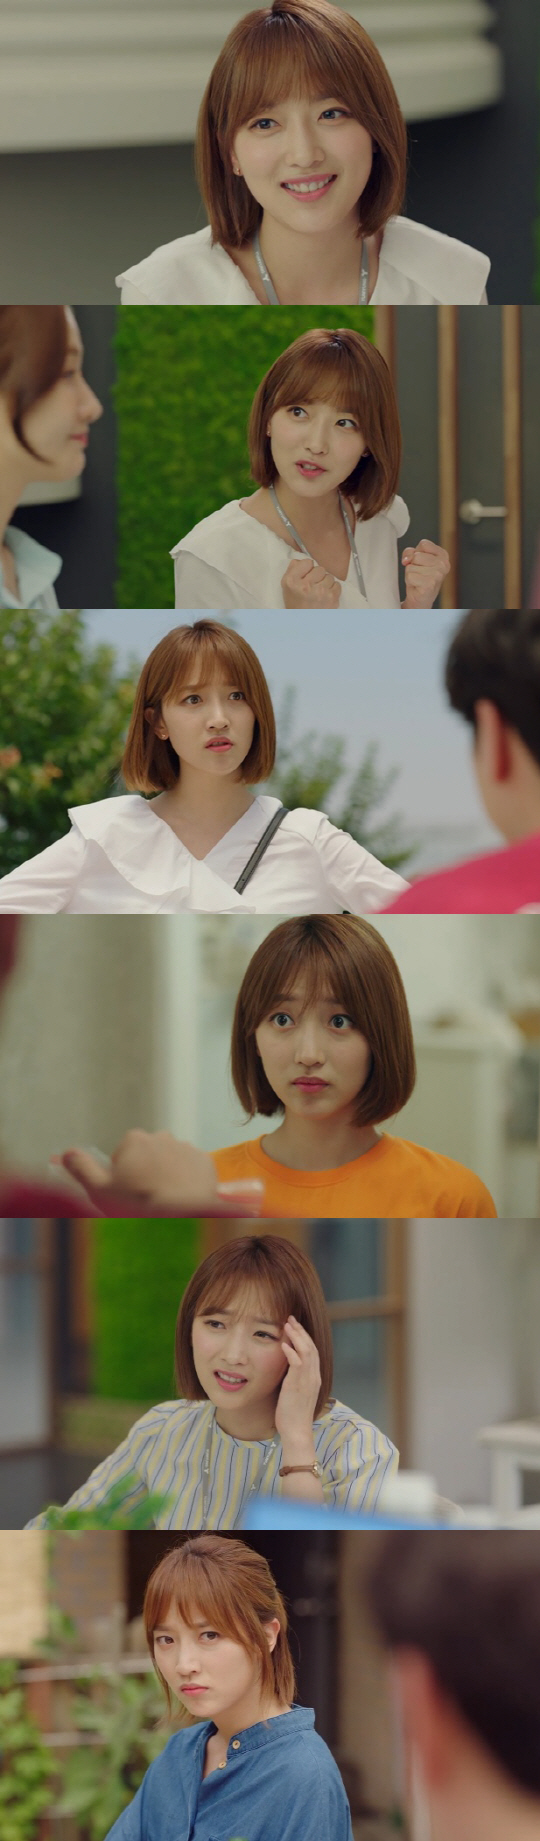 Actor Pyo Ye-jin is getting a pleasant consensus by drawing the first job adaptation of Super Rookie in TVN drama Why is Secretary Kim?Pyo Ye-jin is working as a new secretary in Why is Kim Secretary? and is working as Kim Ji-ah, who emits bright energy.It is always responsible for the vitality of the social early-life character who burns the motivation with a face that is always alive.In particular, Kim Ji-ah is getting caught up in the water-inducing period that causes salty as the drama develops.In the 9th and 10th episodes of Why is Kim Secretary? broadcasted on the 4th and 5th, the grievances and unpredictable situations that can be sympathized with Super Rookie attracted attention with interesting episodes.First, Kim Ji-ah failed to put a strain on the tension between Lee Yeongjun, vice chairman of the company, and Park Min-young, a senior.In his first interview, Lee Yeongjun and Kim Mi-so were involved in the pride battle, and Lee Yeongjun and Kim Mi-so started a full-fledged love affair and were put in a more laughing situation.He had no day to be comfortable at home, when he began to run into everything because of the high-ranking man (Hwang Chan-sung) who lives in the rooftop room.Kim Ji-ah took the fan, which was left for a while, to Goguinam, and gave out the delivery food and blushed at the shameless response of Goguinam, who suggested his favorite menu.In addition, I had to worry about the reality of the high-ranking man living in the rooftop room in the houses prepared by the forced labor of the seniors.Kim Ji-ahs era of suffering gave fresh laughter to each scene, expanding his presence as a new secretary who is suffering from hardships and a mainstay foreshadowing the enemy romance.Meanwhile, Why would Secretary Kim do that is Lee Yeongjun, vice chairman of narcissist who has everything from wealth, face, and skill, but is united with his own love, and Drama, a former secretary-general of Park Min-young, who has fully assisted him.It airs every Wednesday and Thursday at 9:30.